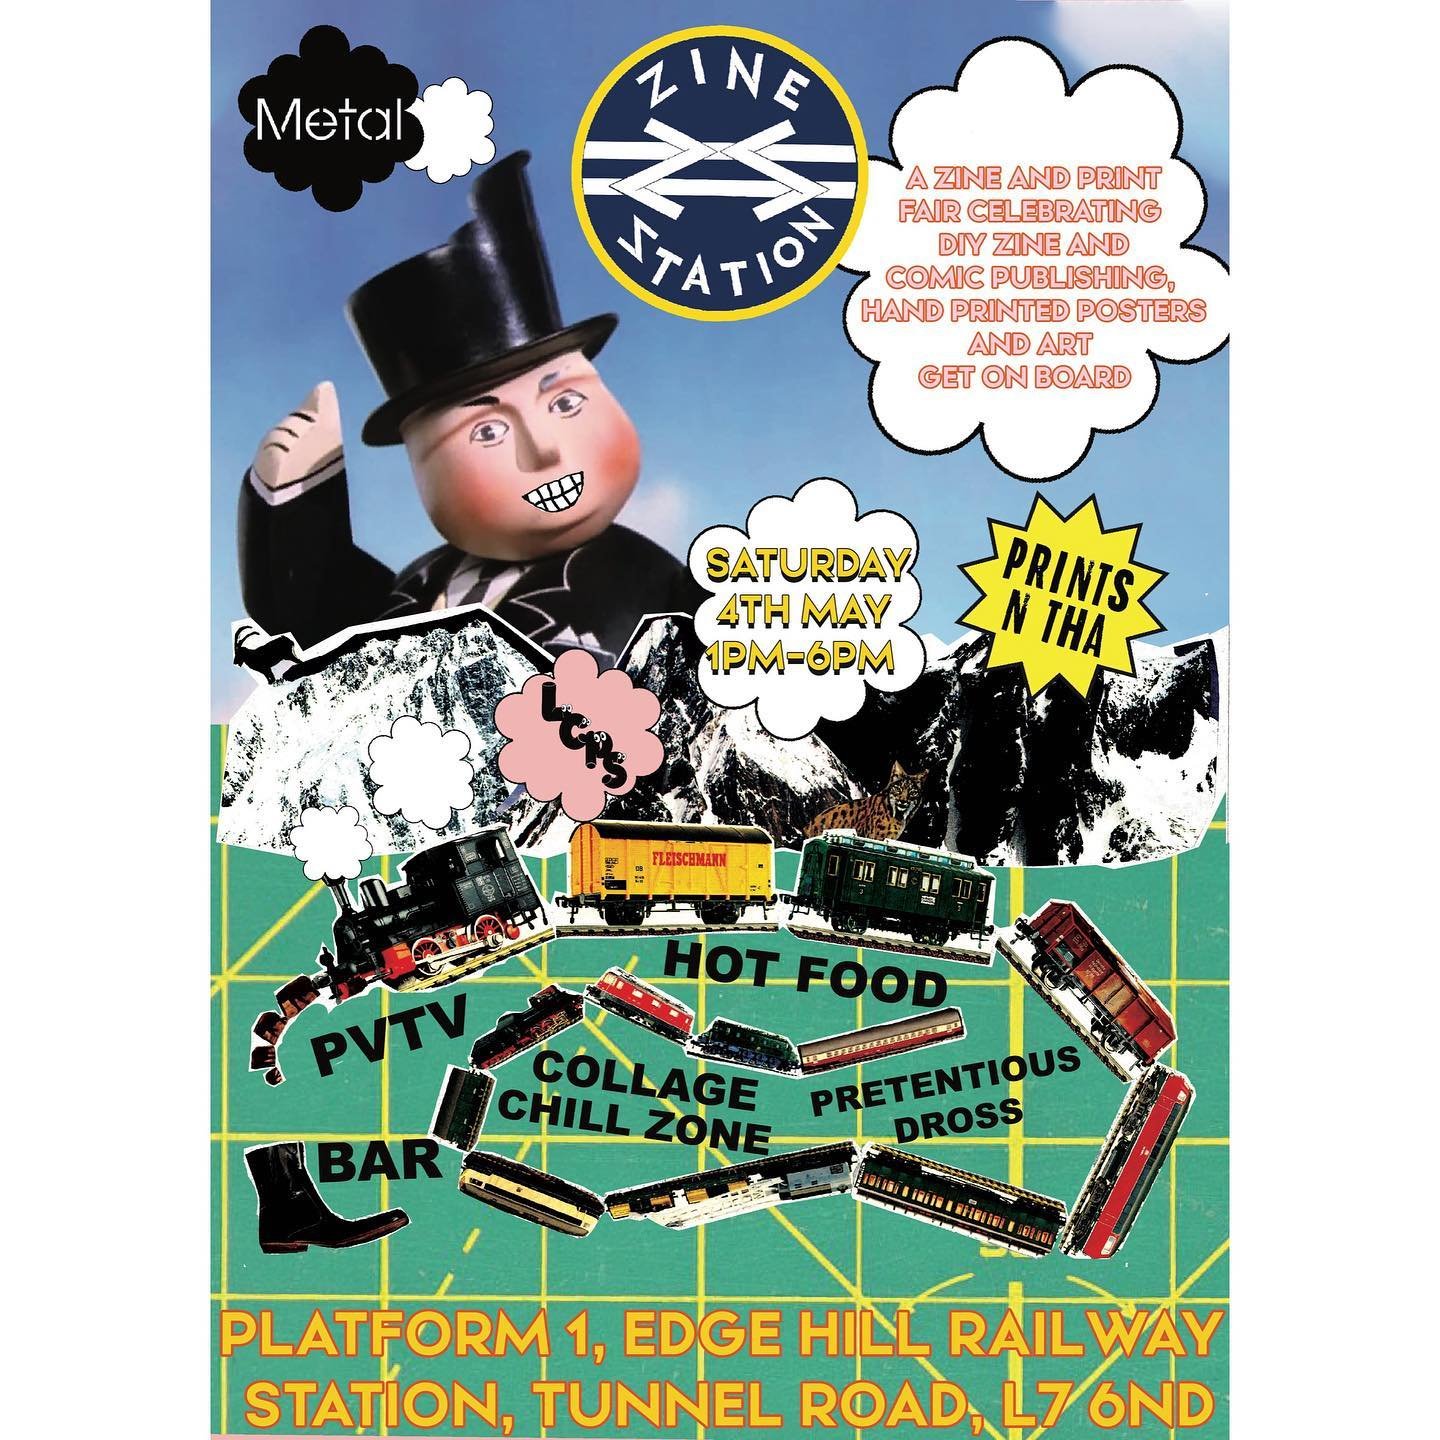 Choo Chooo&hellip;.. Next stop ZINE STATION, All aboard! 
On Saturday 4 May, Metal Liverpool, LCPS and Prints N Tha will be hosting an alternative Zine and Print fair.  Celebrating DIY publishing, zine, print and comic culture in Liverpool and Mersey